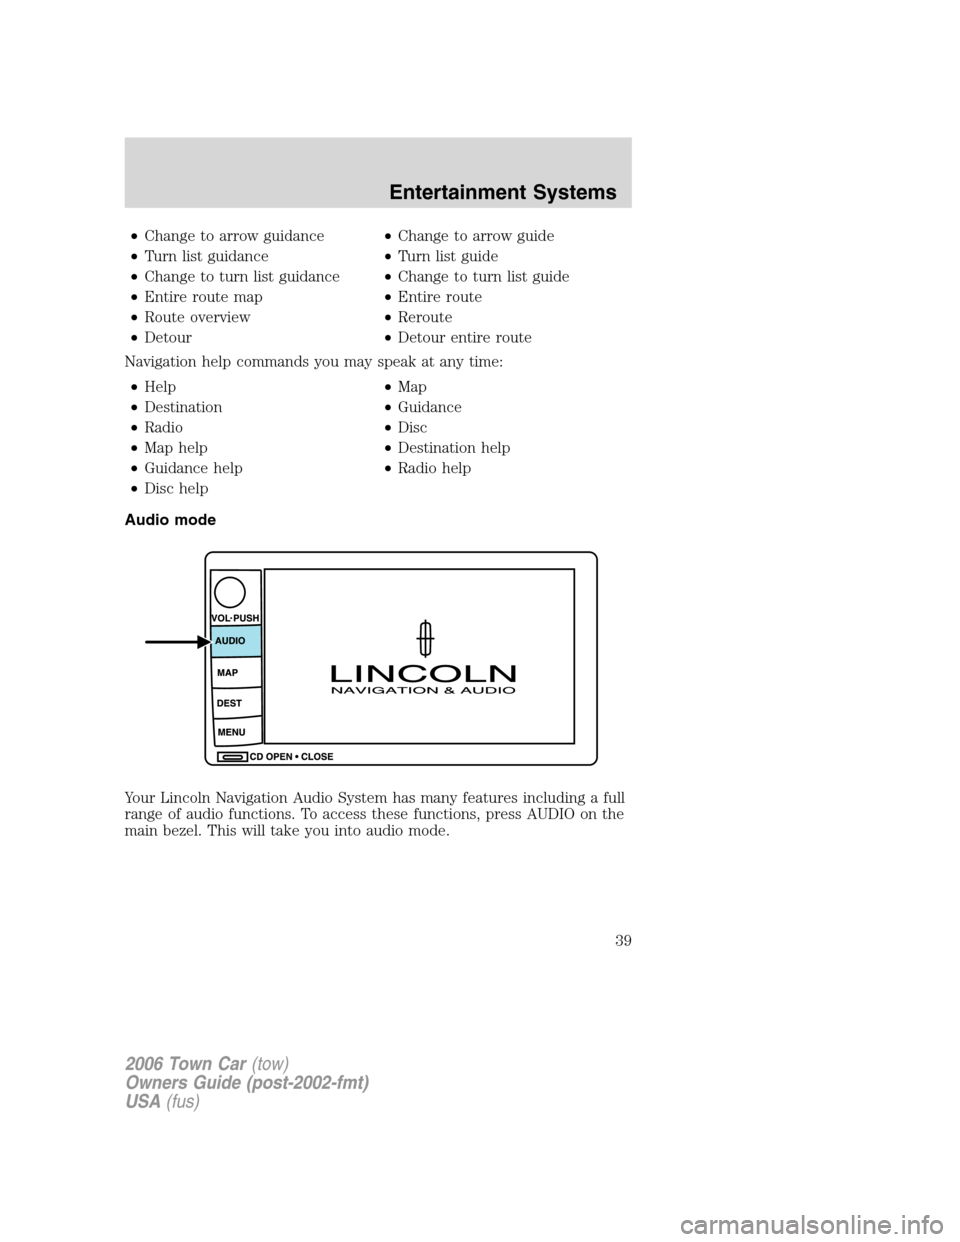 LINCOLN TOWN CAR 2006  Owners Manual •Change to arrow guidance•Change to arrow guide
•Turn list guidance•Turn list guide
•Change to turn list guidance•Change to turn list guide
•Entire route map•Entire route
•Route over